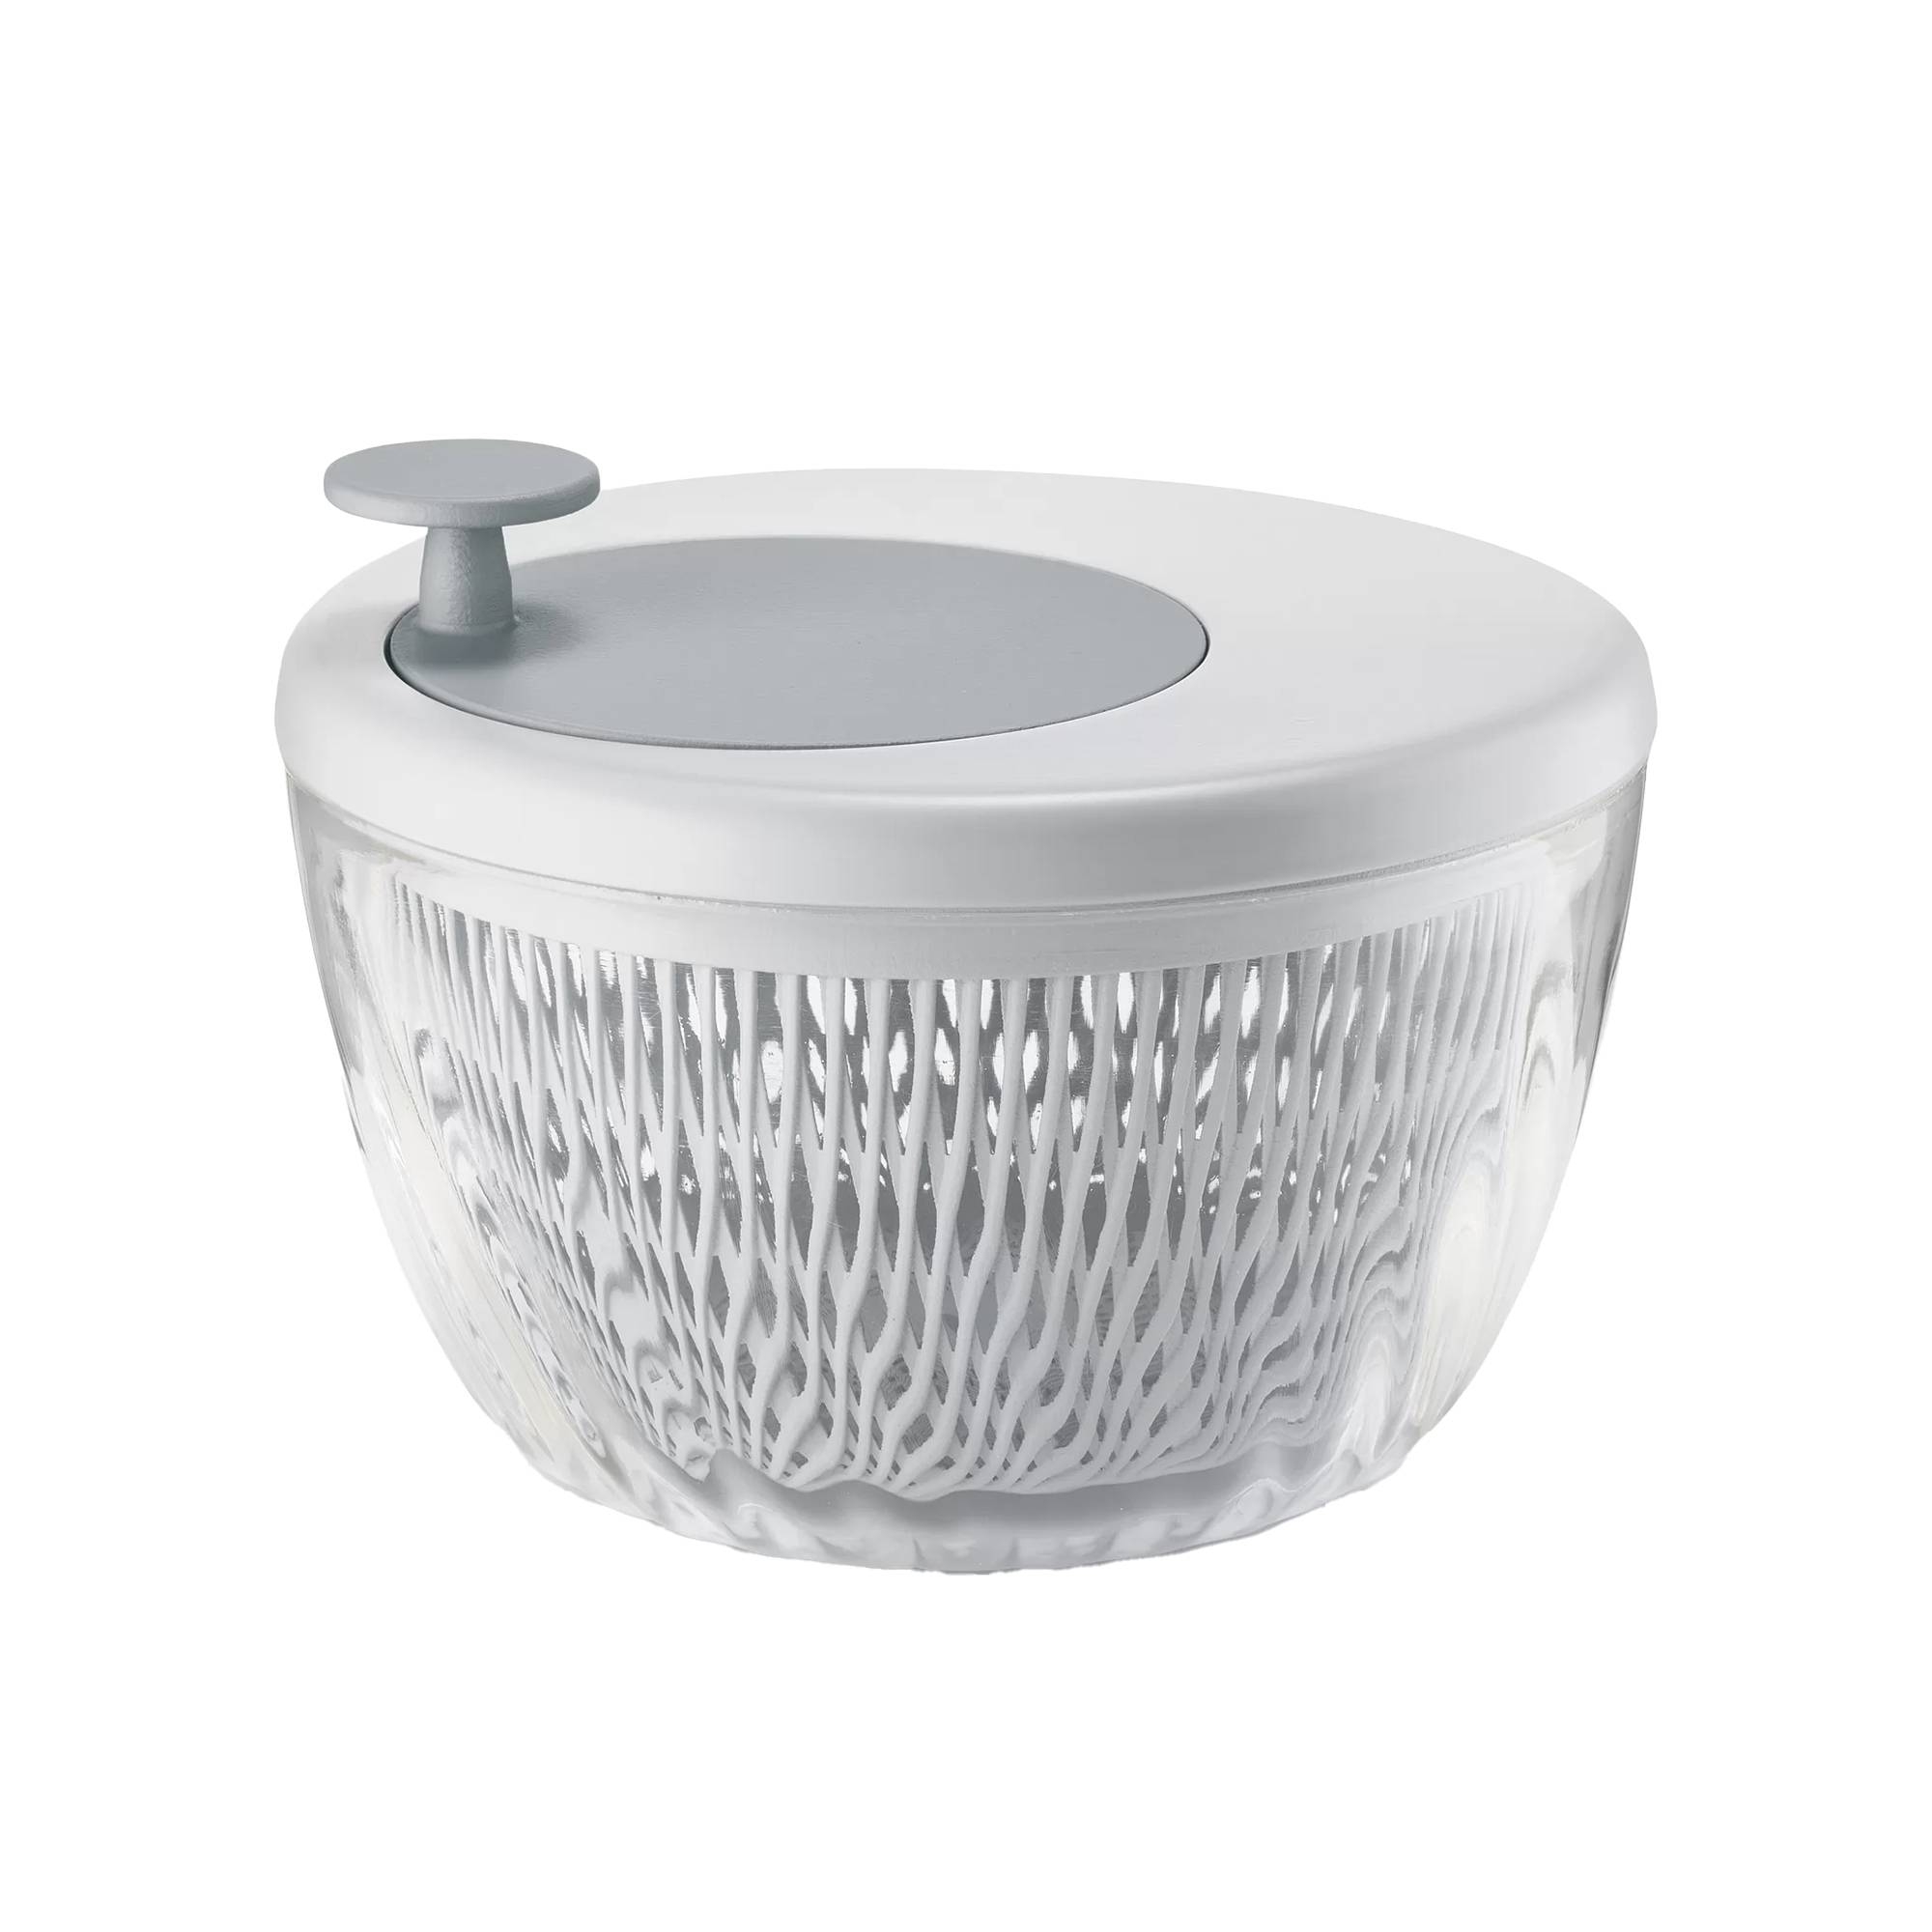 Guzzini Spin & Store Salad Spinner White Image 1